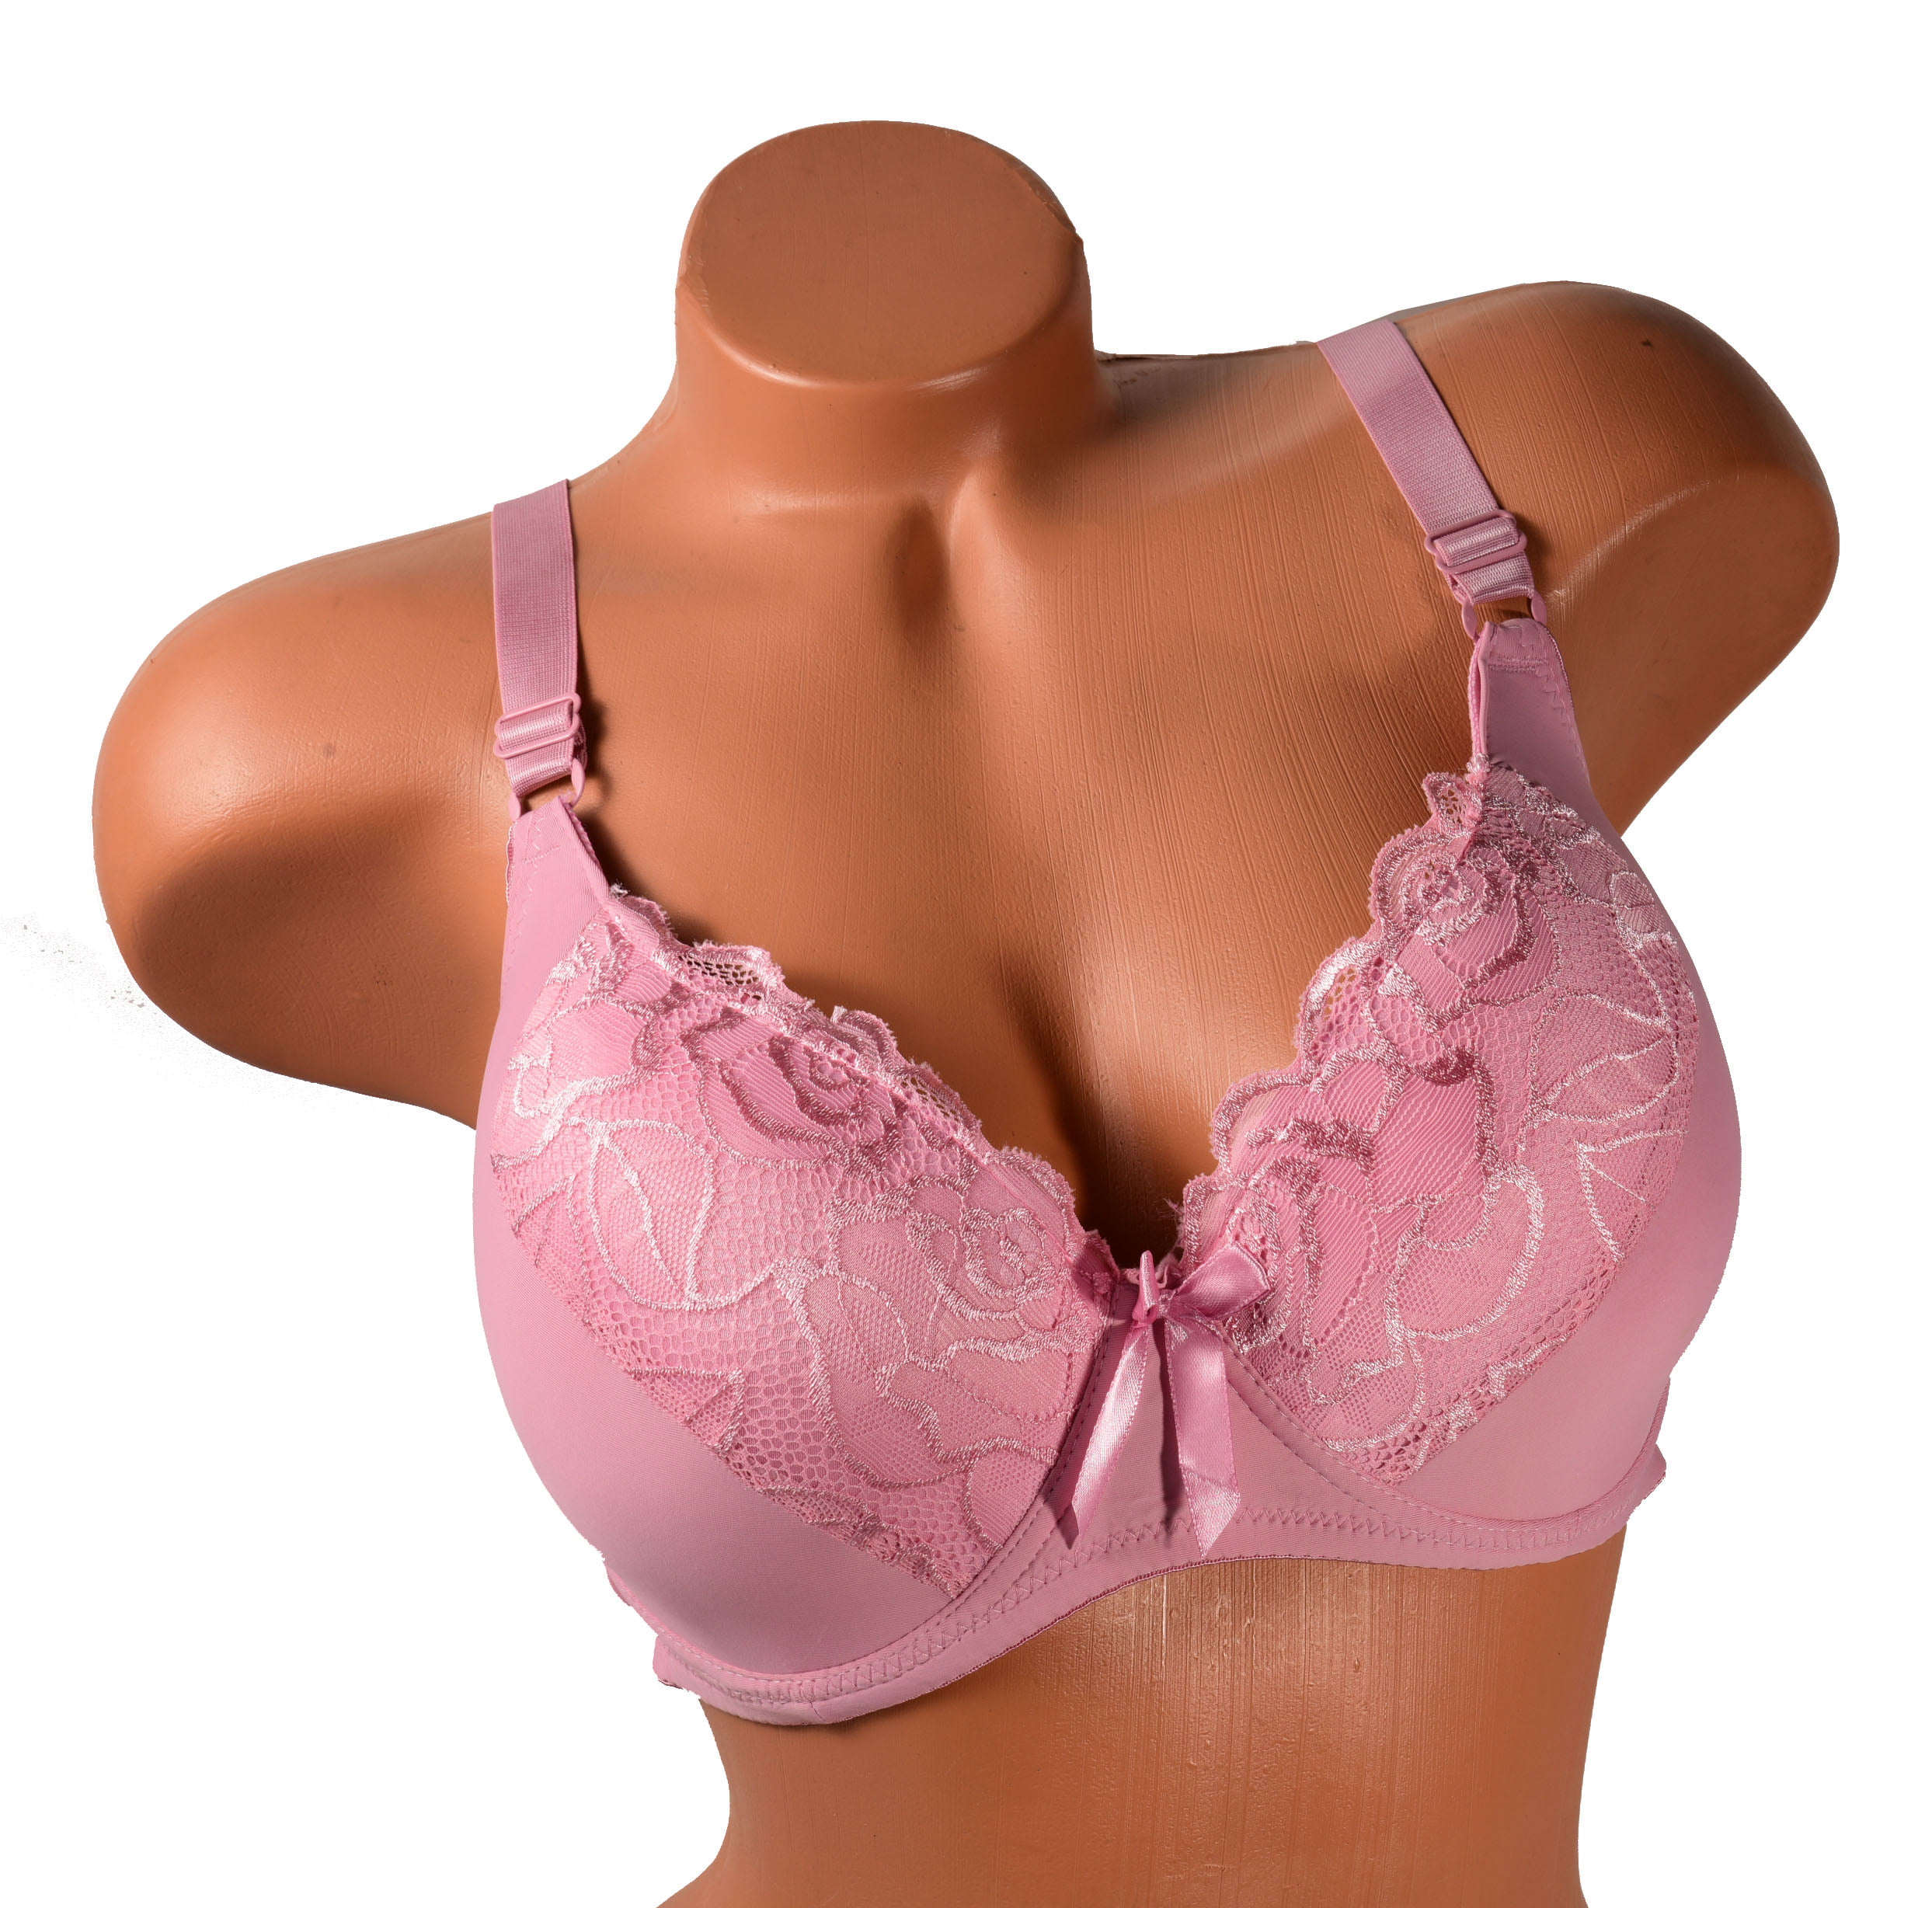 Women Bras 6 Pack of Bra D cup DD cup DDD cup Size 40D (8214